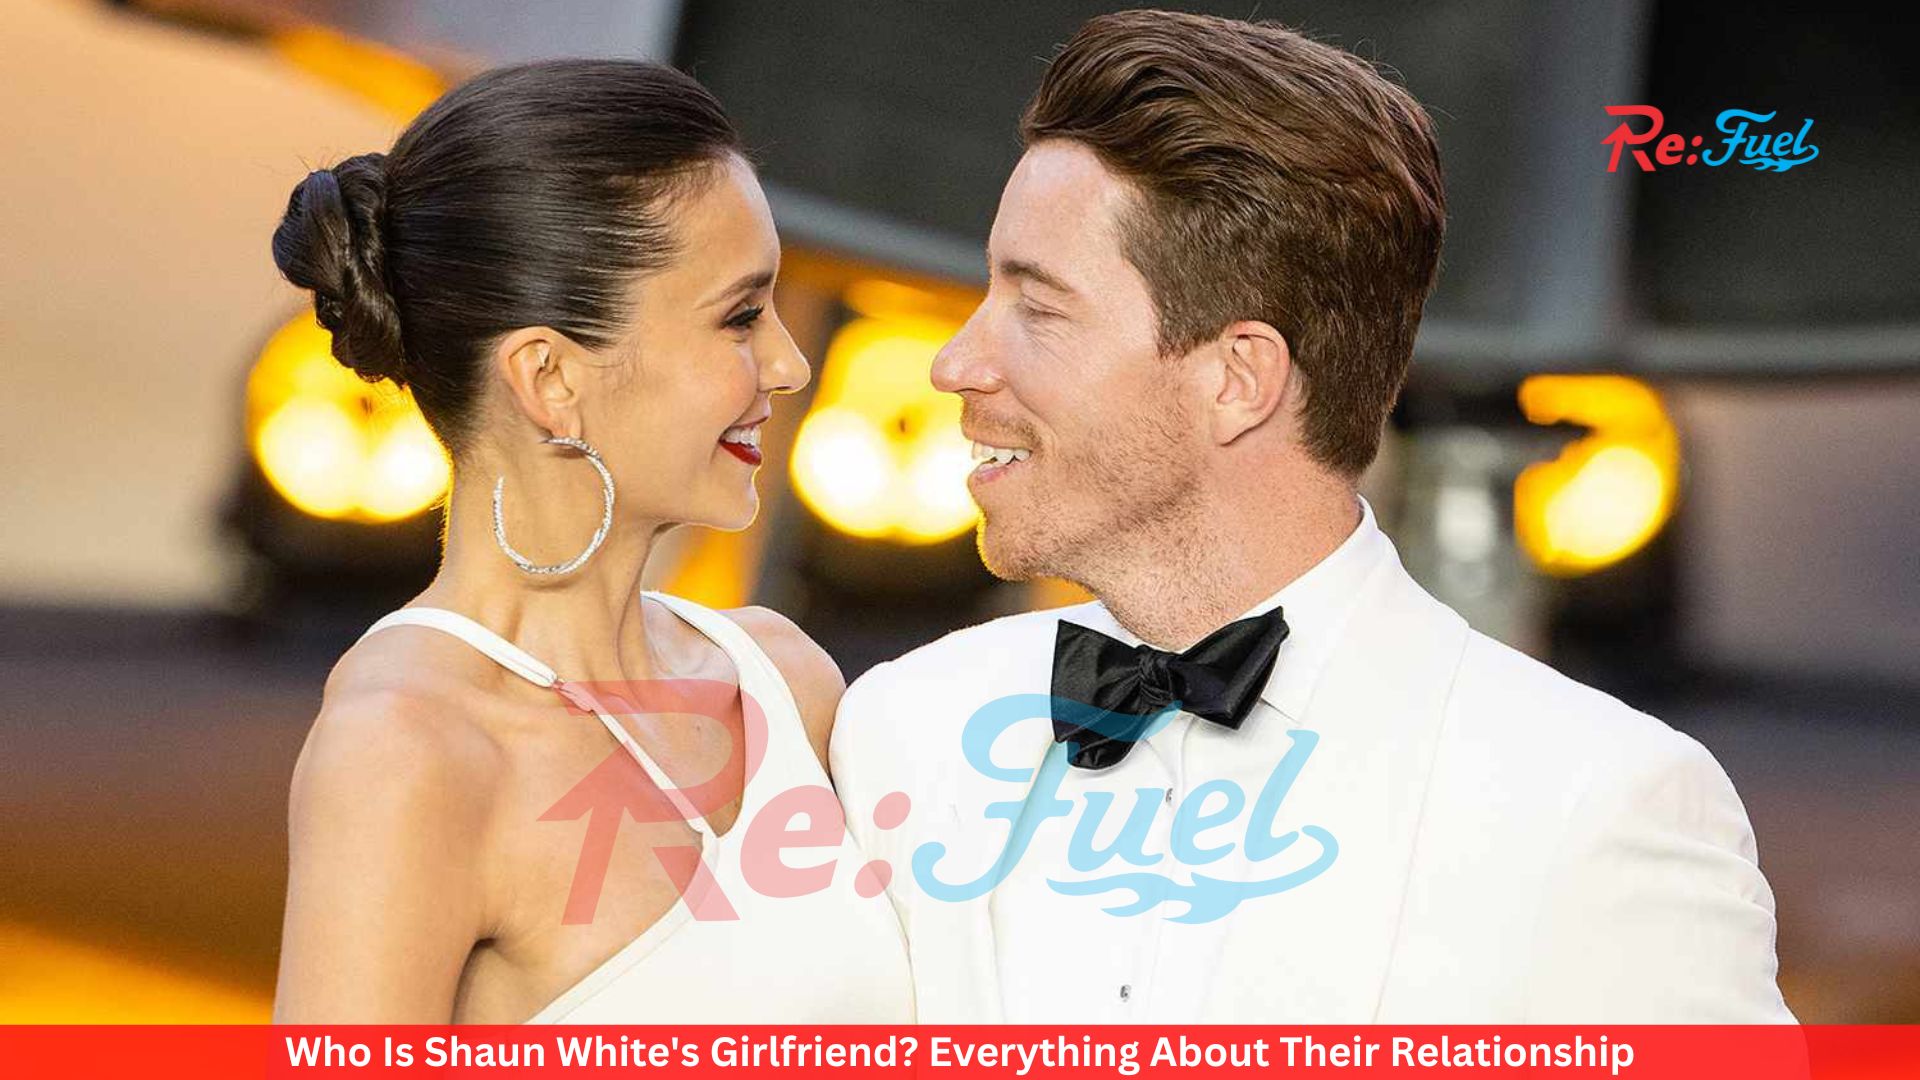 Who Is Shaun White's Girlfriend? Everything About Their Relationship